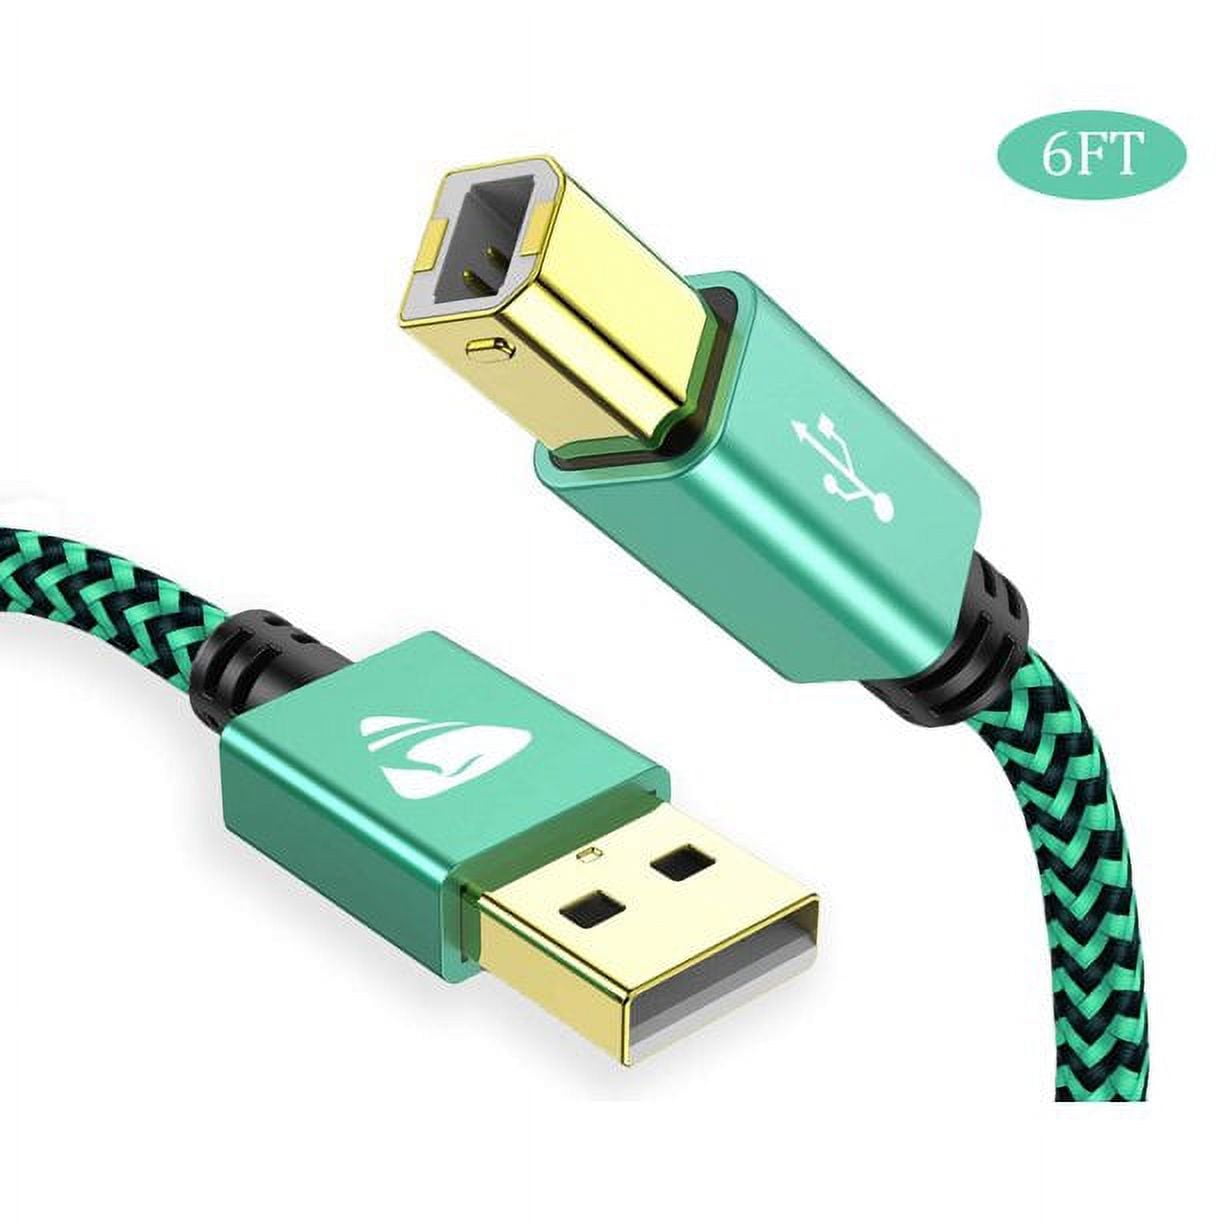 UGREEN 5ft USB A to B Printer Cable - High-Speed for HP, Canon, Brother,  Samsung, Dell, Epson, Lexmark, Xerox, and More